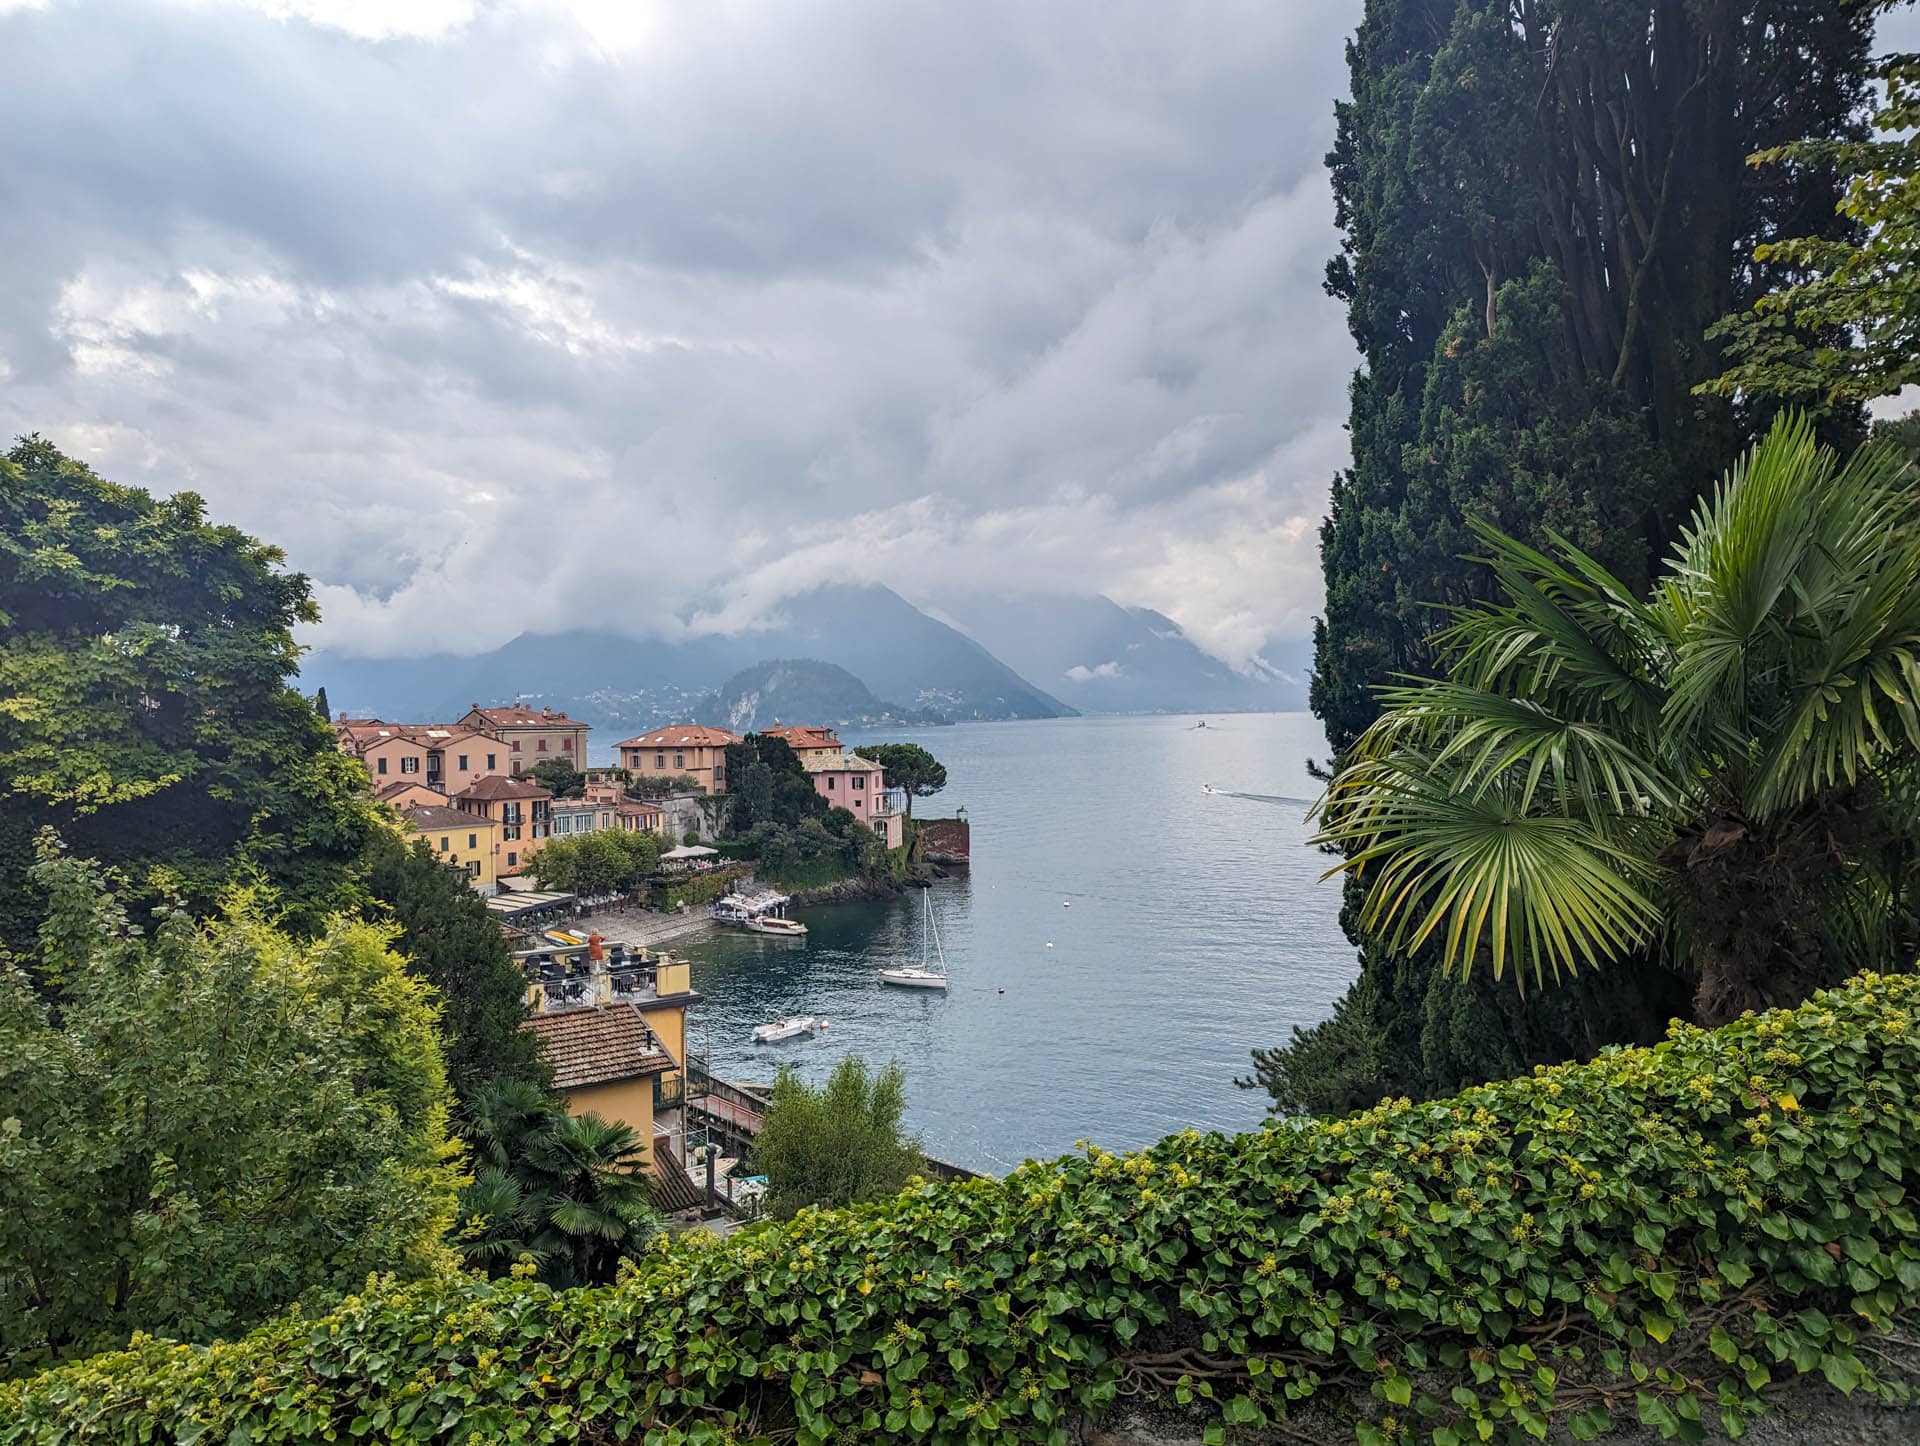 view of Varenna from behind hedge